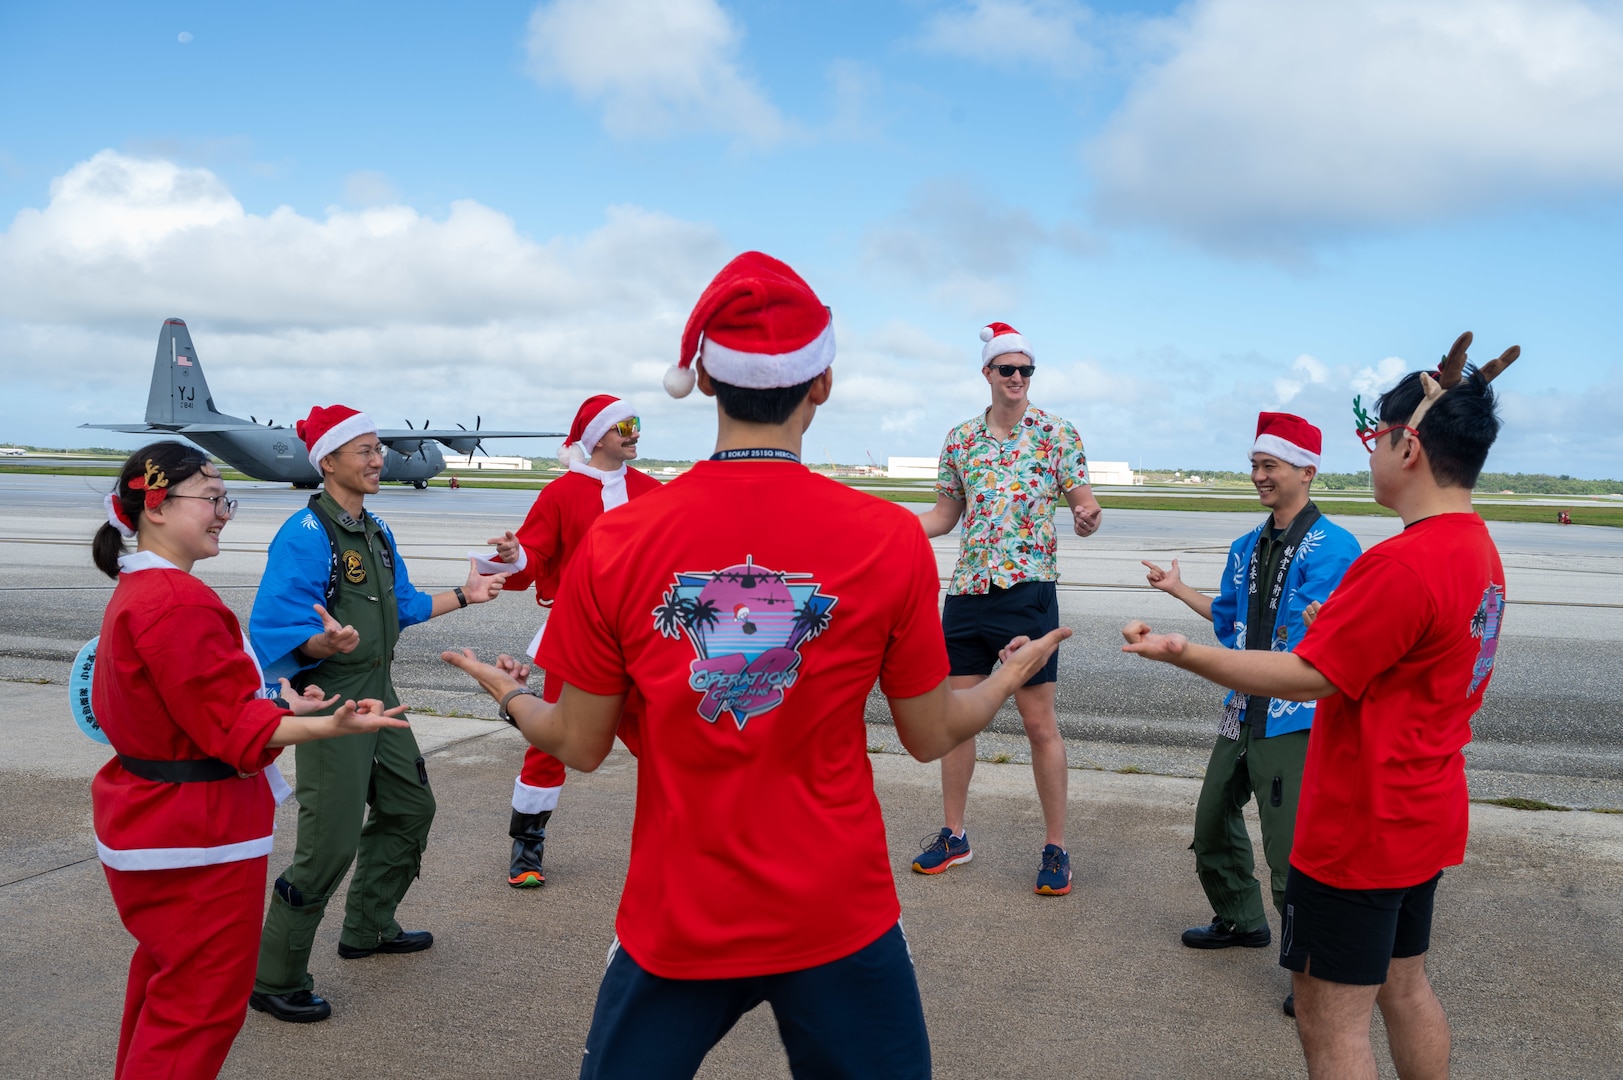 Members of the U.S. Air Force, Japan Air Self-Defense Force, Republic of Korea Air Force, and Royal Australian Air Force point at each other during the annual bundle building event in support of Operation Christmas Drop 2023 (OCD 23) at Andersen Air Force Base, Guam, Dec. 2, 2023. OCD provides an annual opportunity for U.S. and partner nation forces to operate side-by-side to airlift humanitarian aid to remote islands across the Pacific, with this event emblematic of our mutual respect and cooperation with our friends and neighbors. (U.S. Air Force photo by Senior Airman Brooklyn Golightly)